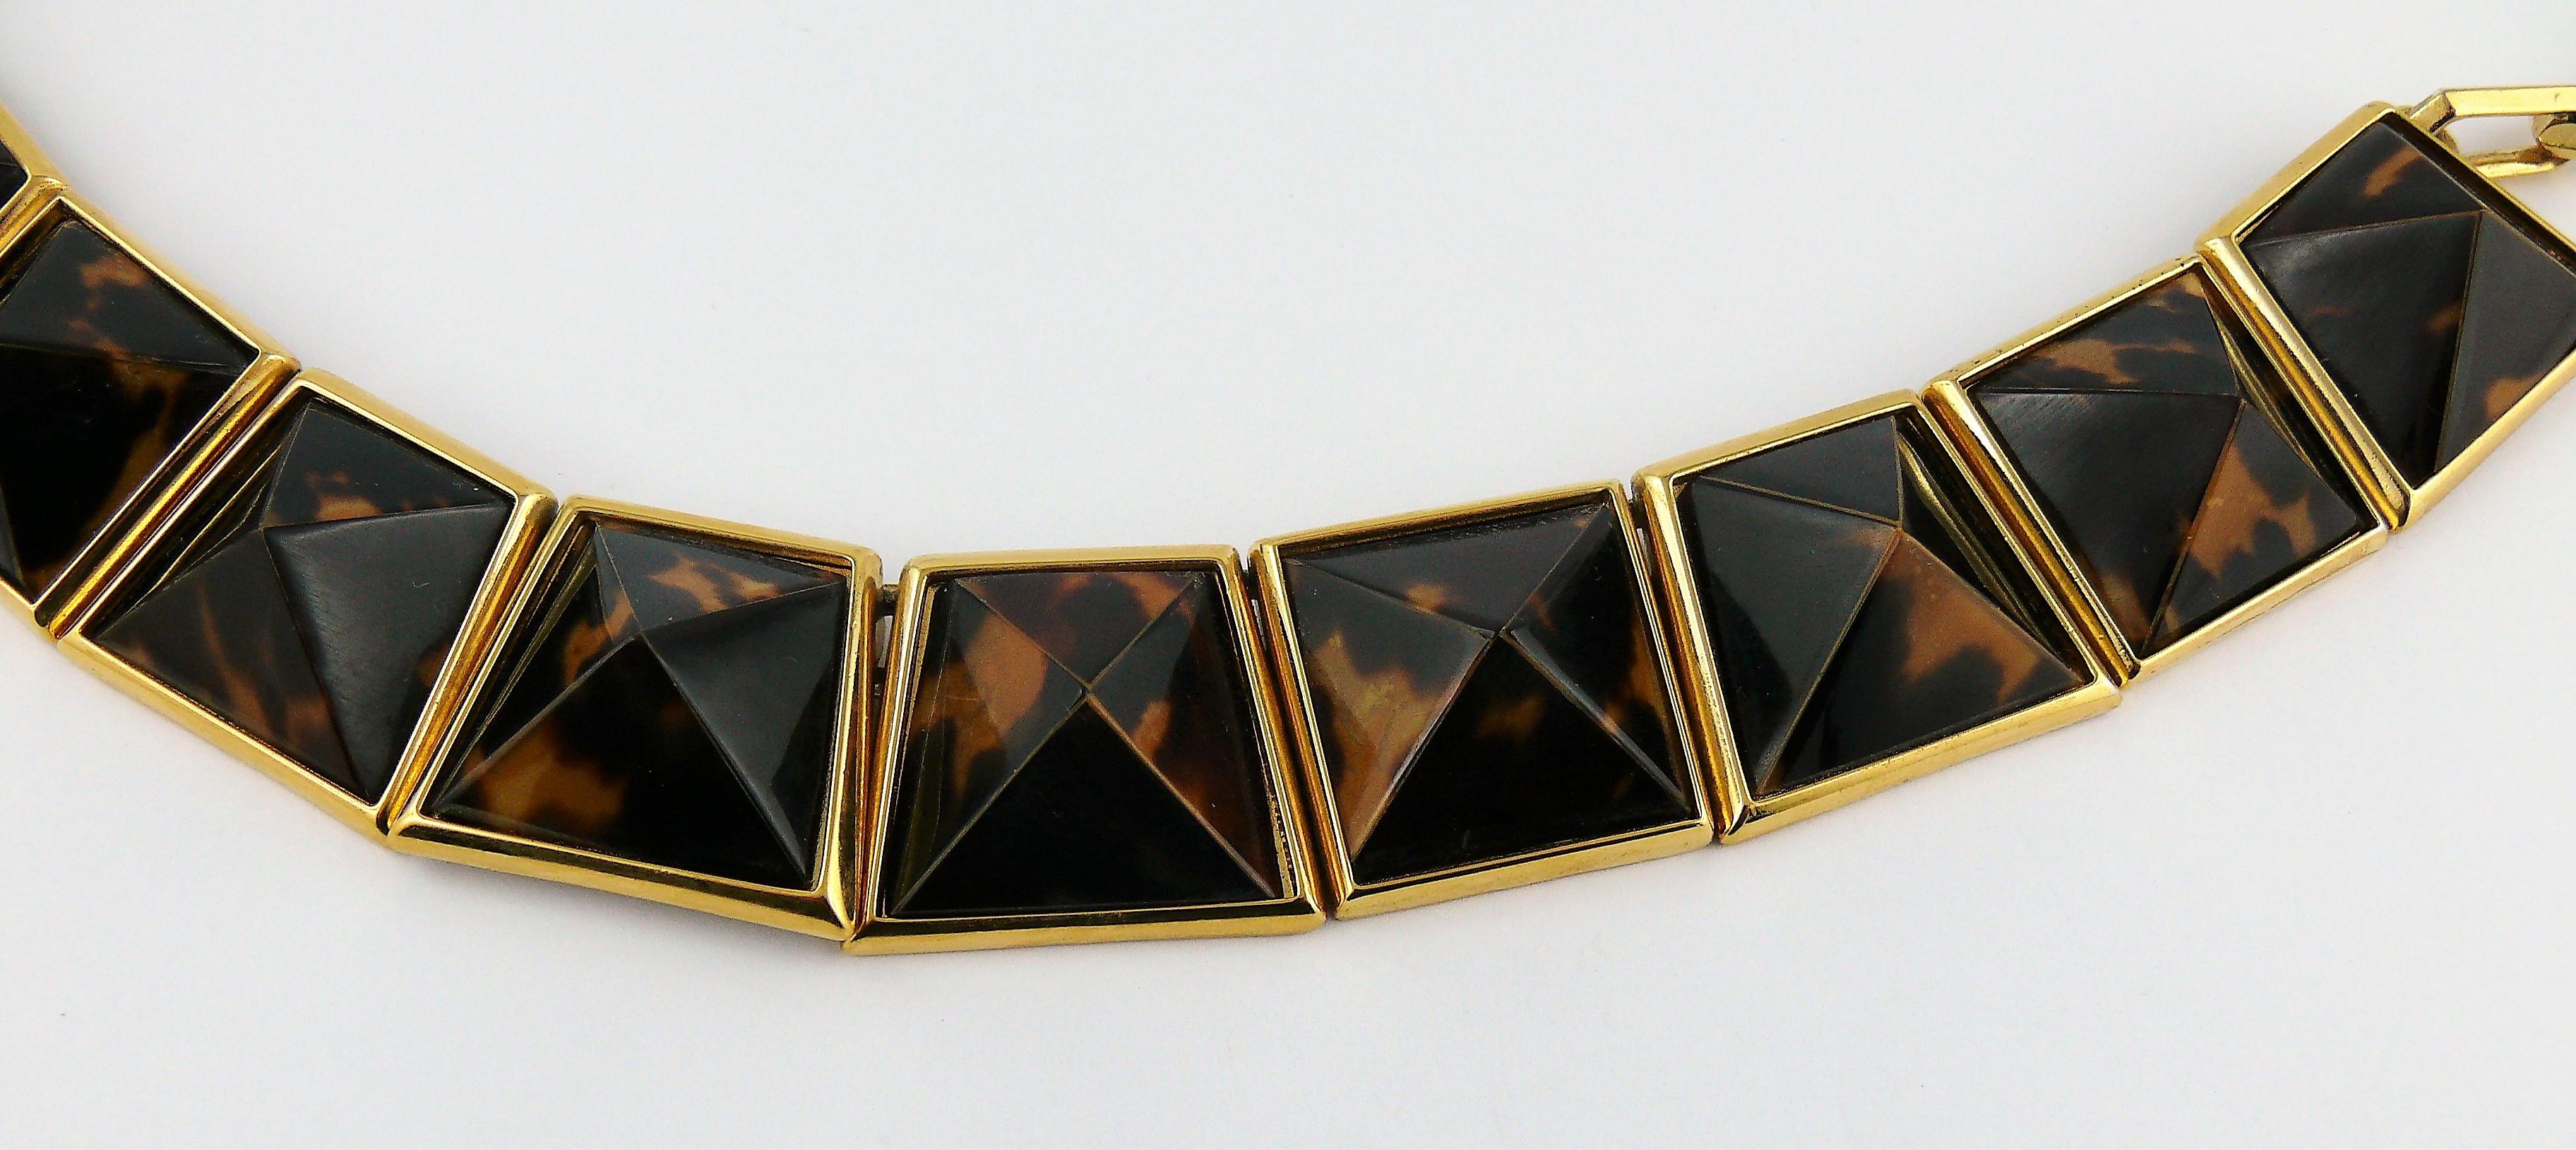 Yves Saint Laurent YSL Vintage Iconic Leopard Pyramid Necklace In Fair Condition For Sale In Nice, FR